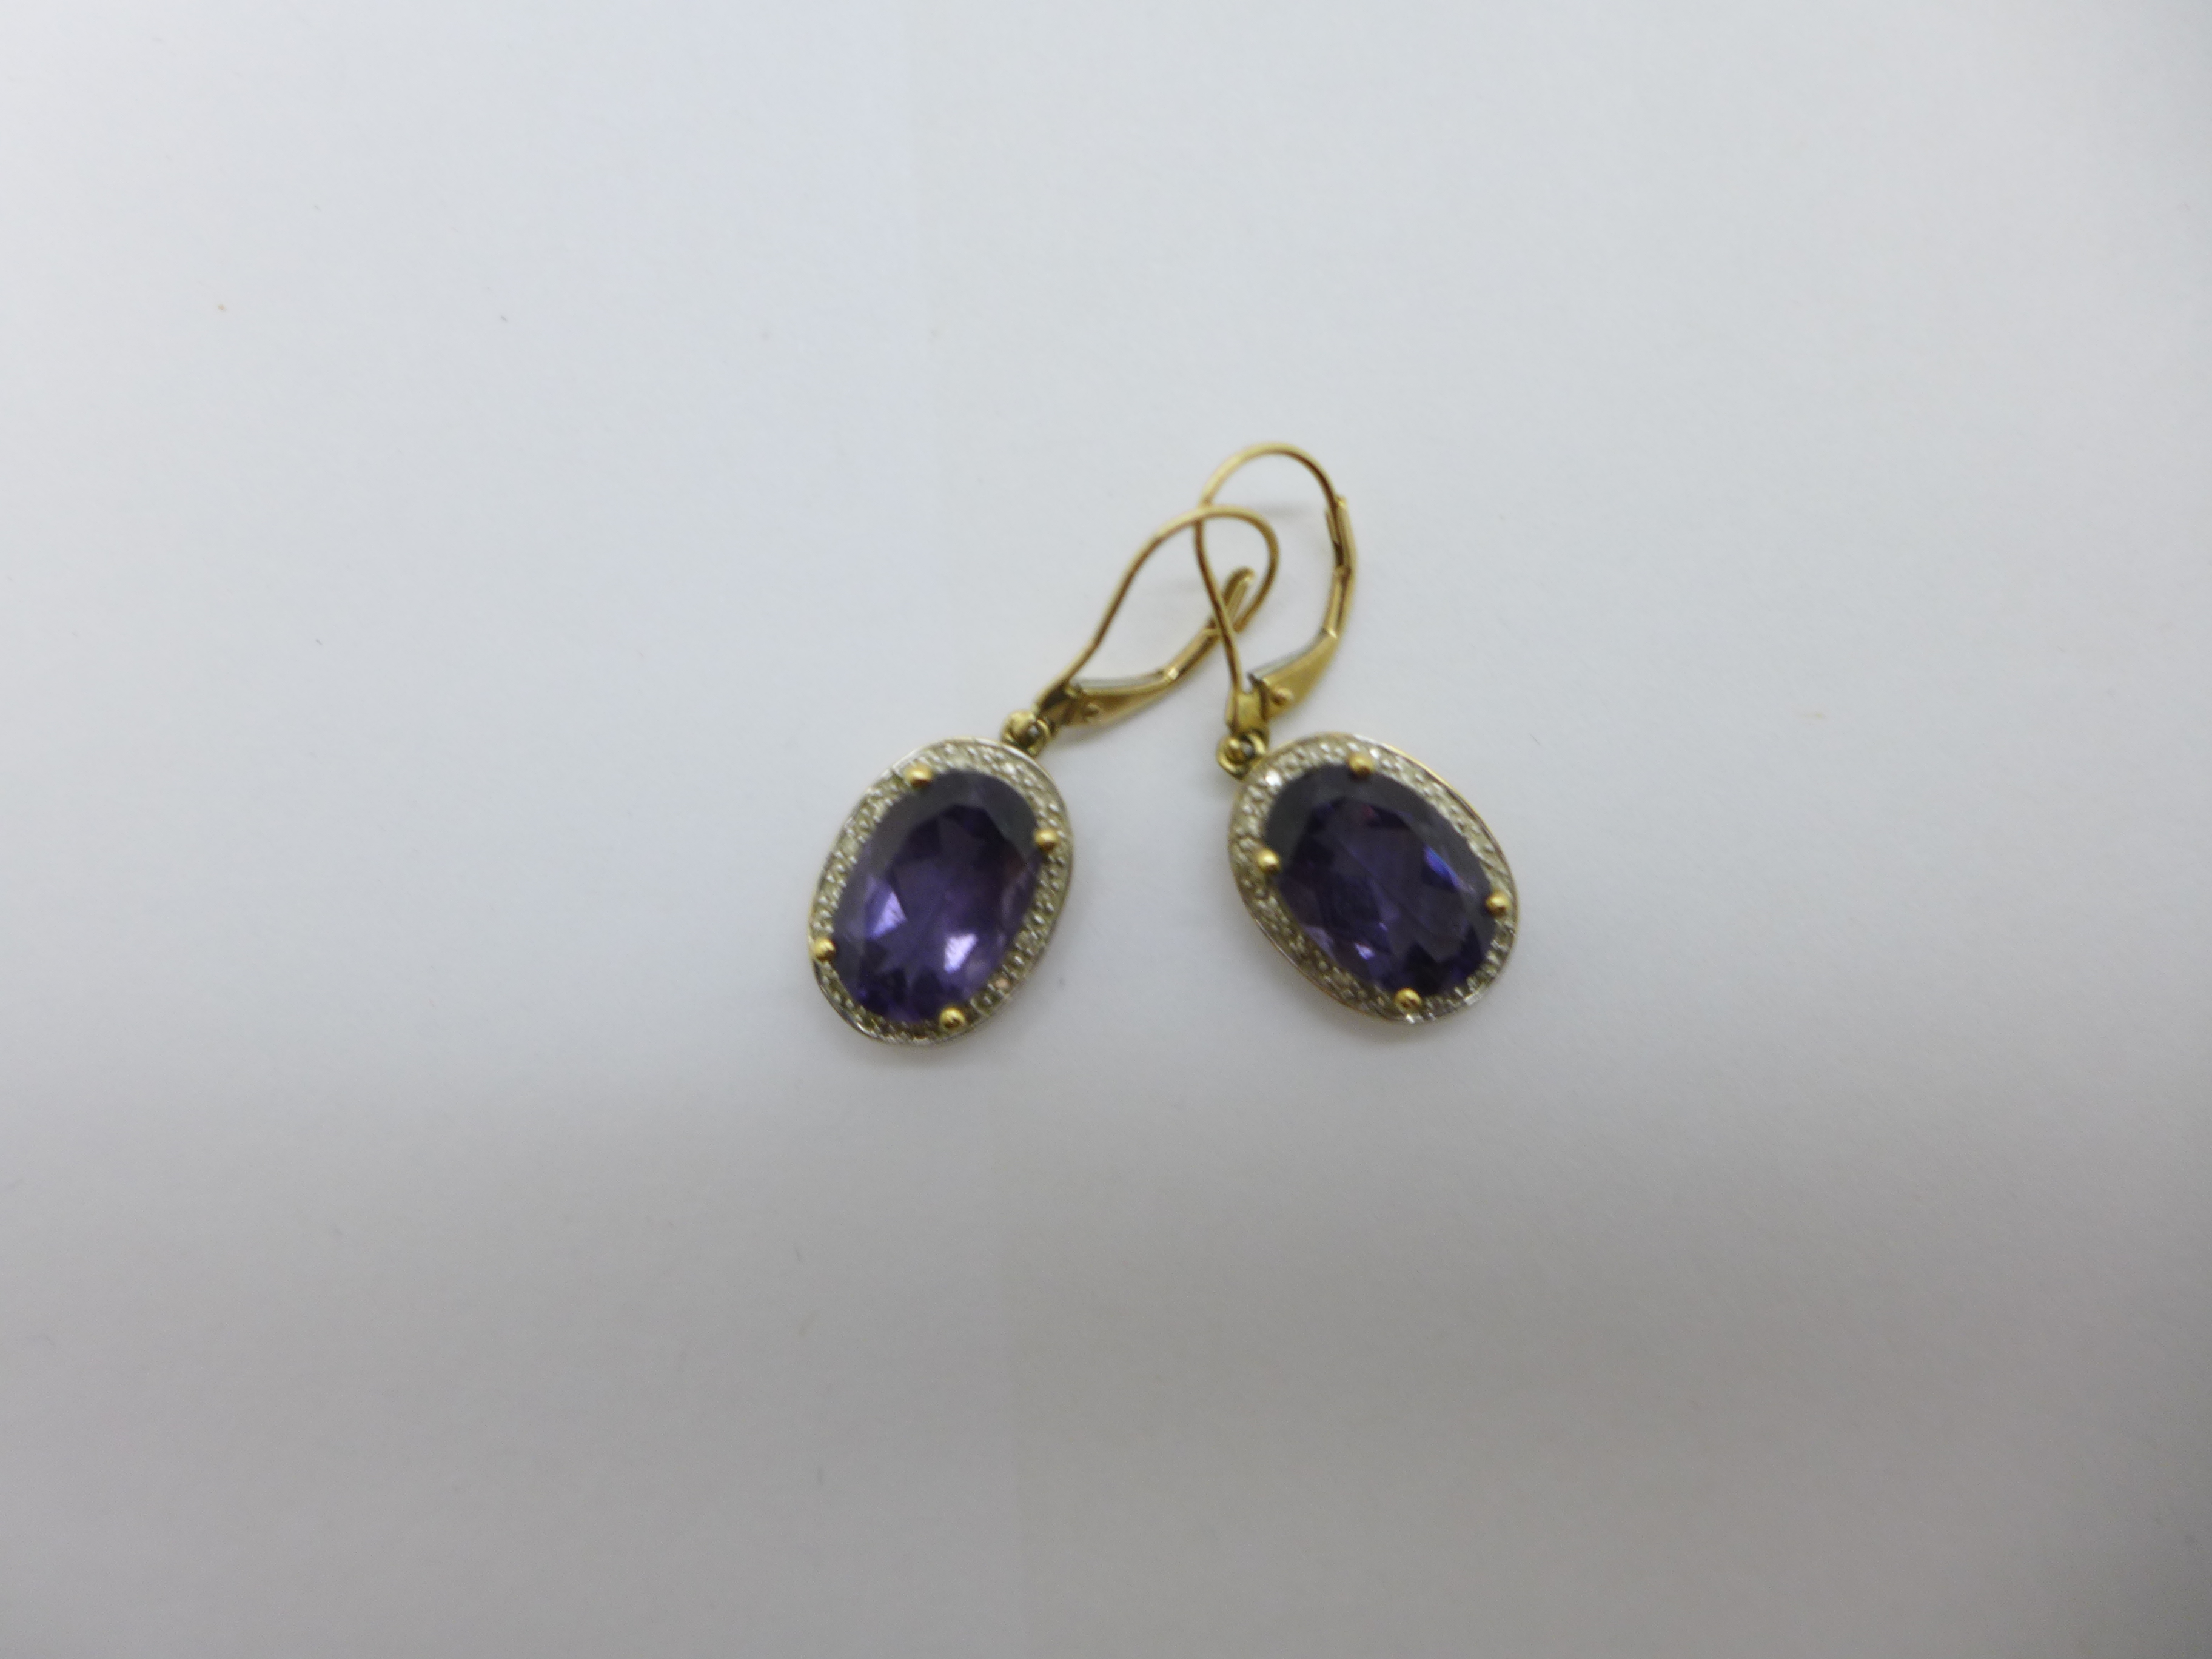 A pair of 9ct gold, amethyst and diamond pendant earrings, 4.1g, amethysts approximately 8mm x 11mm - Image 2 of 3